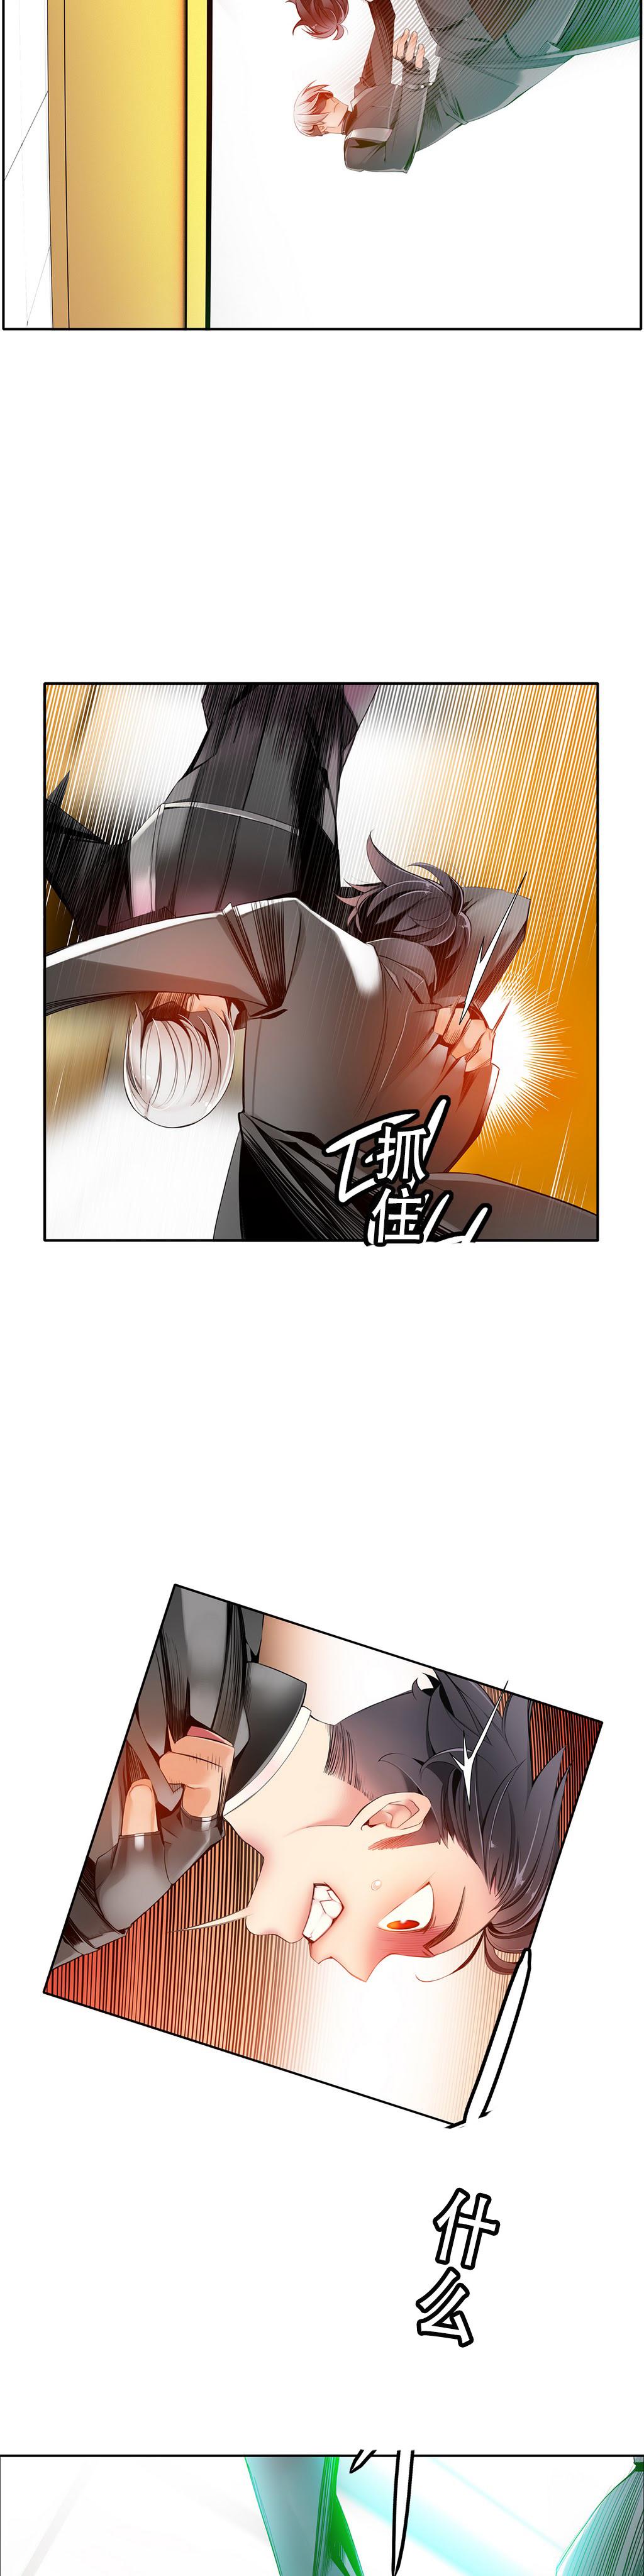 [Juder] 莉莉丝的纽带(Lilith`s Cord) Ch.1-16 [Chinese] 264